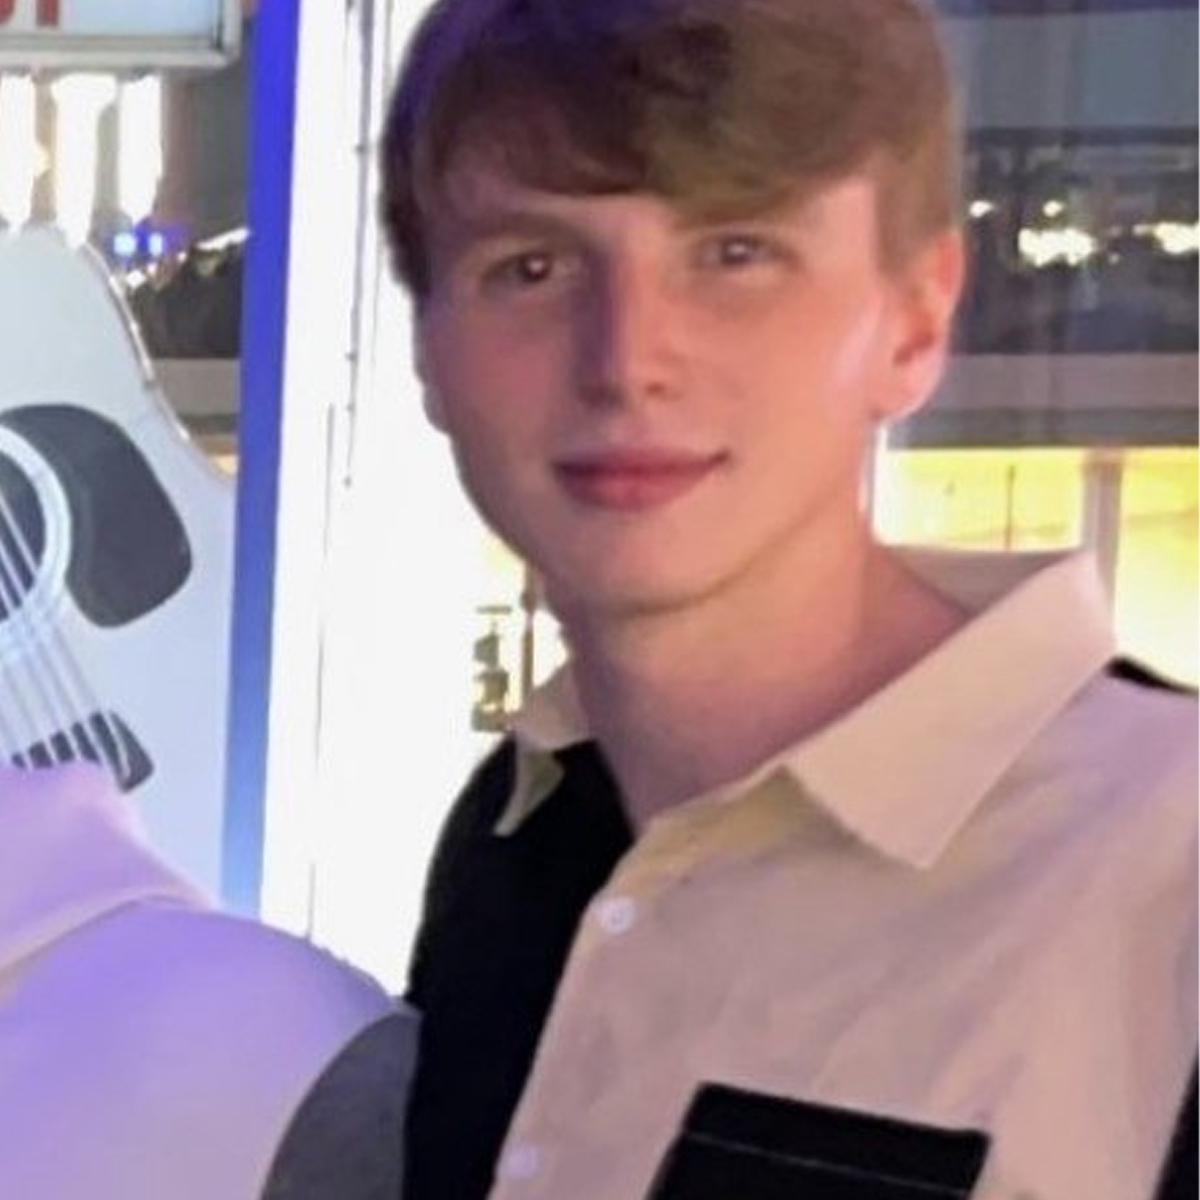 University of Missouri student found dead in Cumberland River in Nashville after going missing from a downtown bar